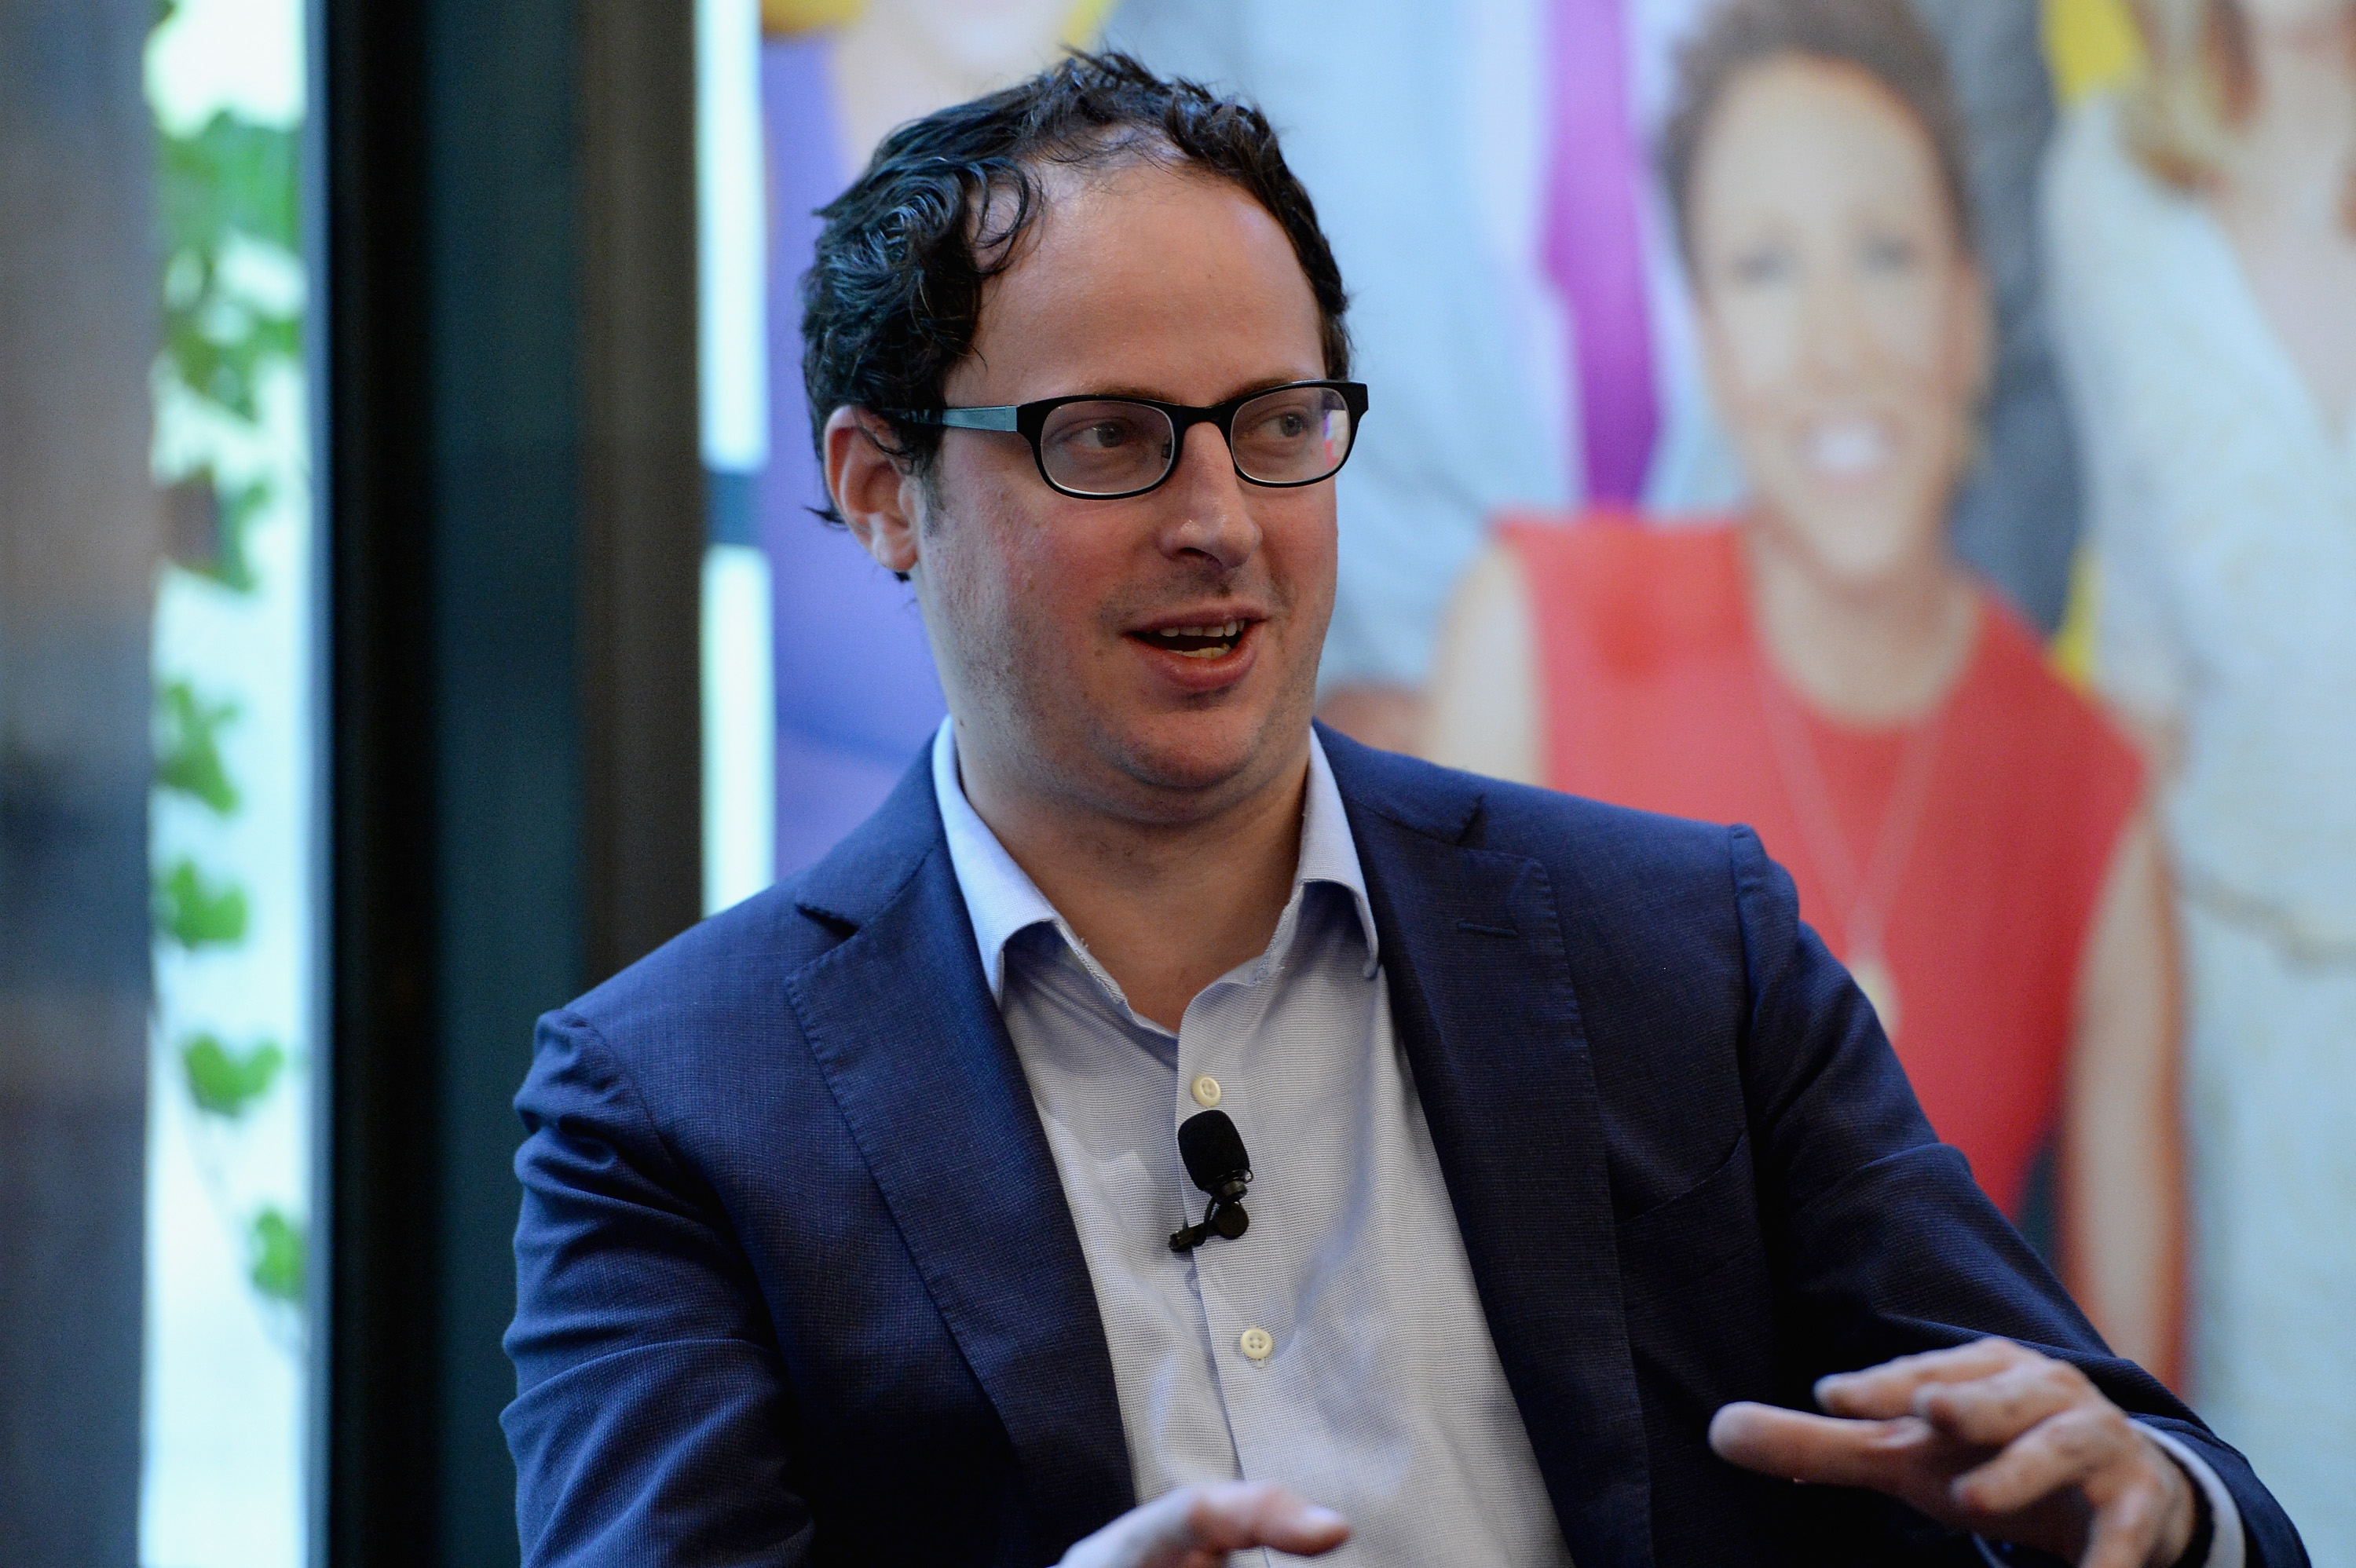 Nate Silver Slammed for Comparing School Closures to Iraq War—'Worst